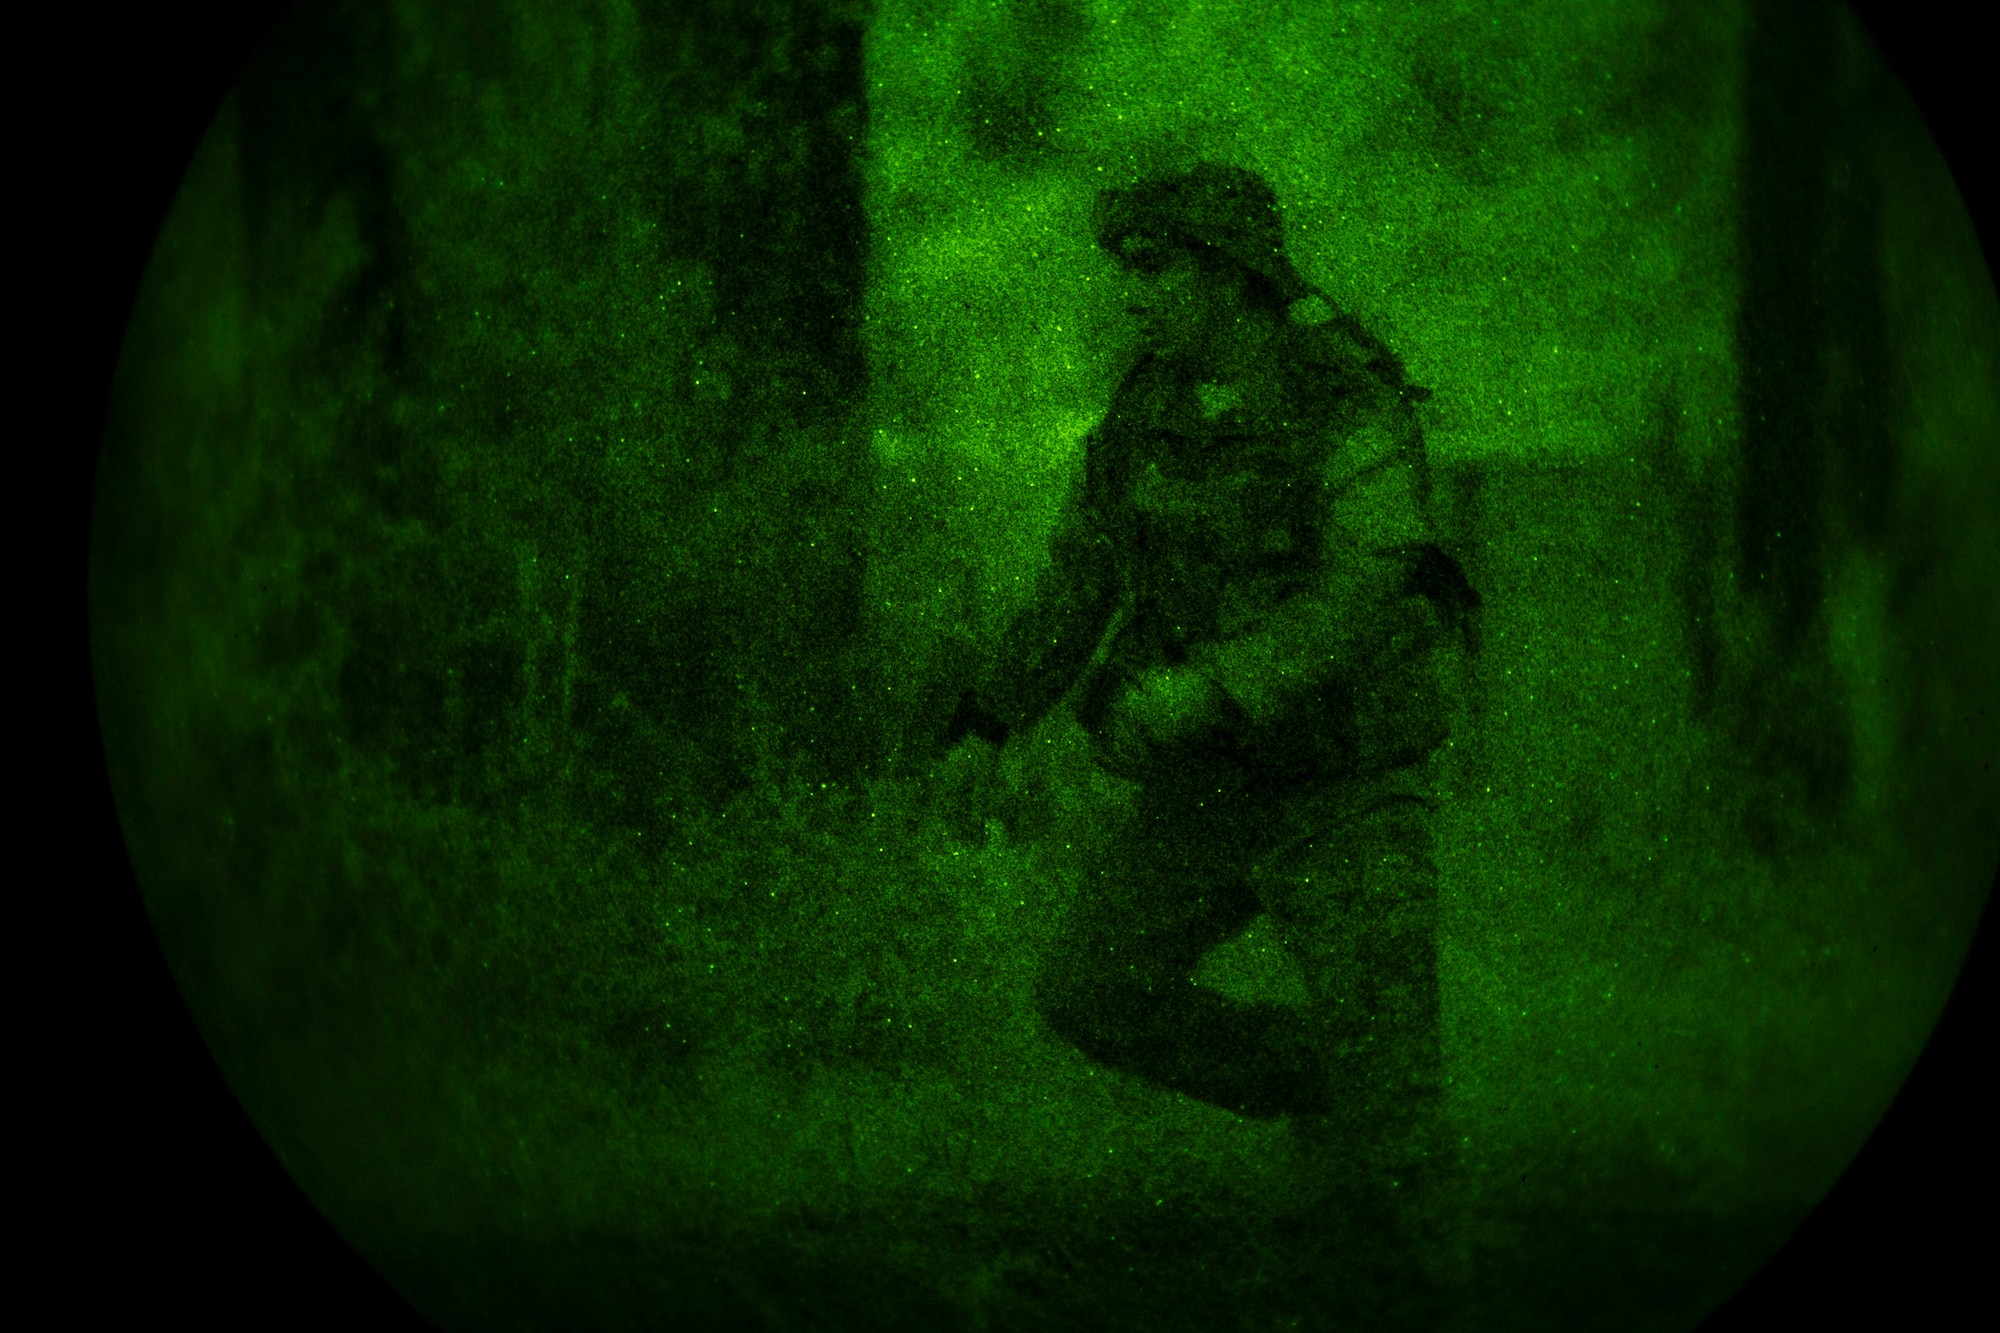 Staff Sgt. Edgar Elizalde, 347th Operations Support Squadron HC-130J Combat King II instructor loadmaster, runs to a checkpoint during nighttime evasion training, Oct. 24, 2017, at Moody Air Force Base, Ga. The new, three-day combined training is designed to merge many smaller courses and seamlessly tie together skills that could be used in the event that Airmen become isolated during a mission. (U.S. Air Force photo by Senior Airman Daniel Snider)